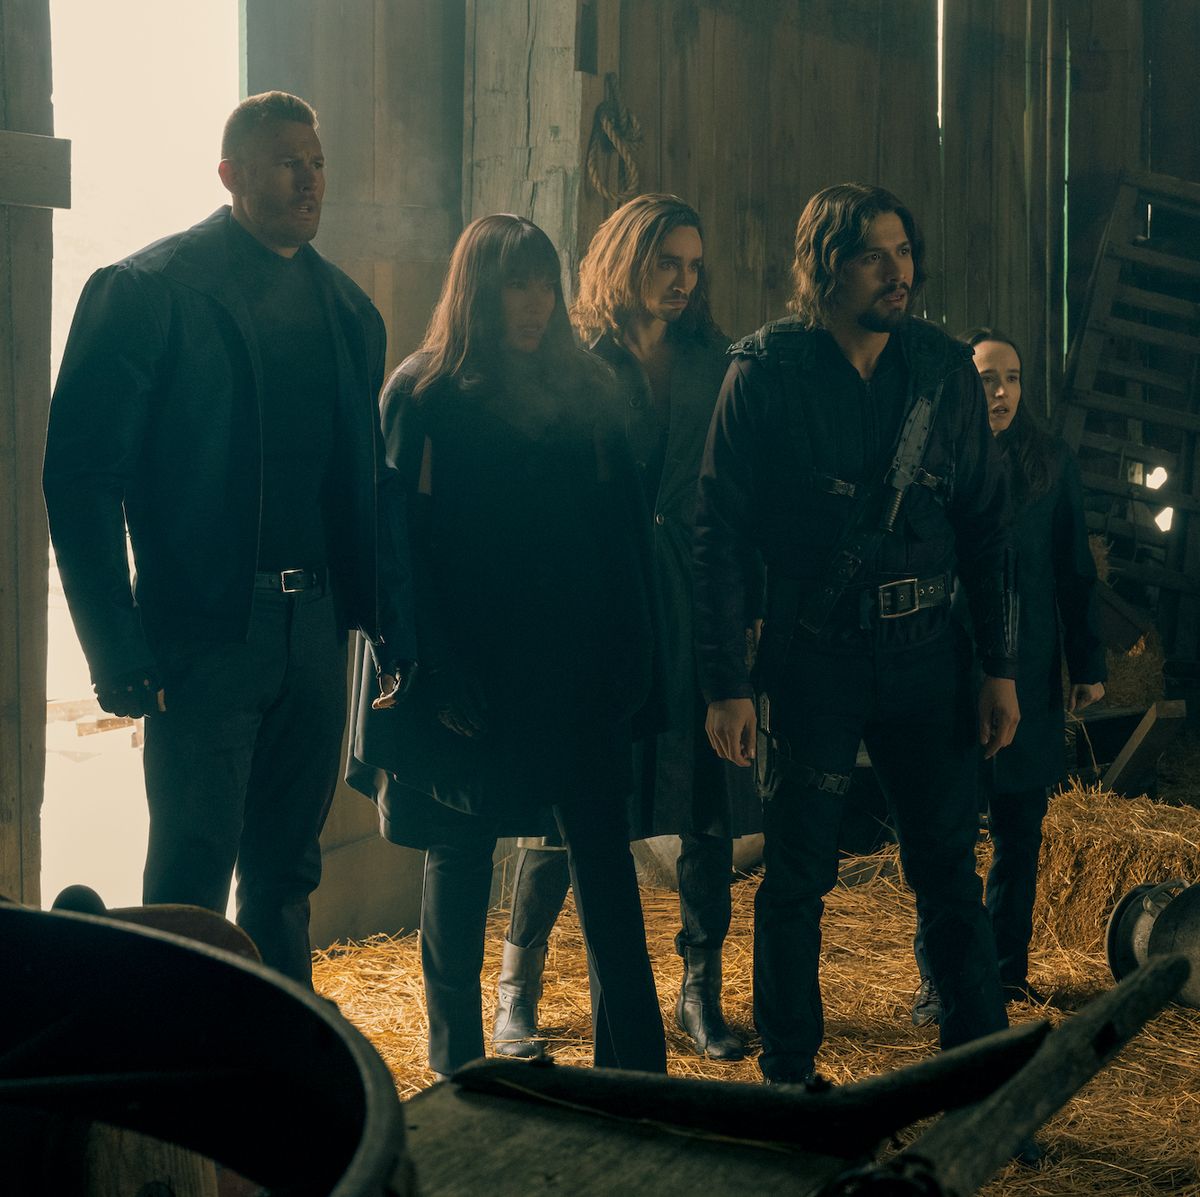 the umbrella academy l to r tom hopper as luther hargreeves, emmy raver lampman as allison hargreeves, robert sheehan as klaus hargreeves, david castaÑeda as diego hargreeves and ellen page as vanya hargreeves in the umbrella academy cr christos kalohoridisnetflix © 2020